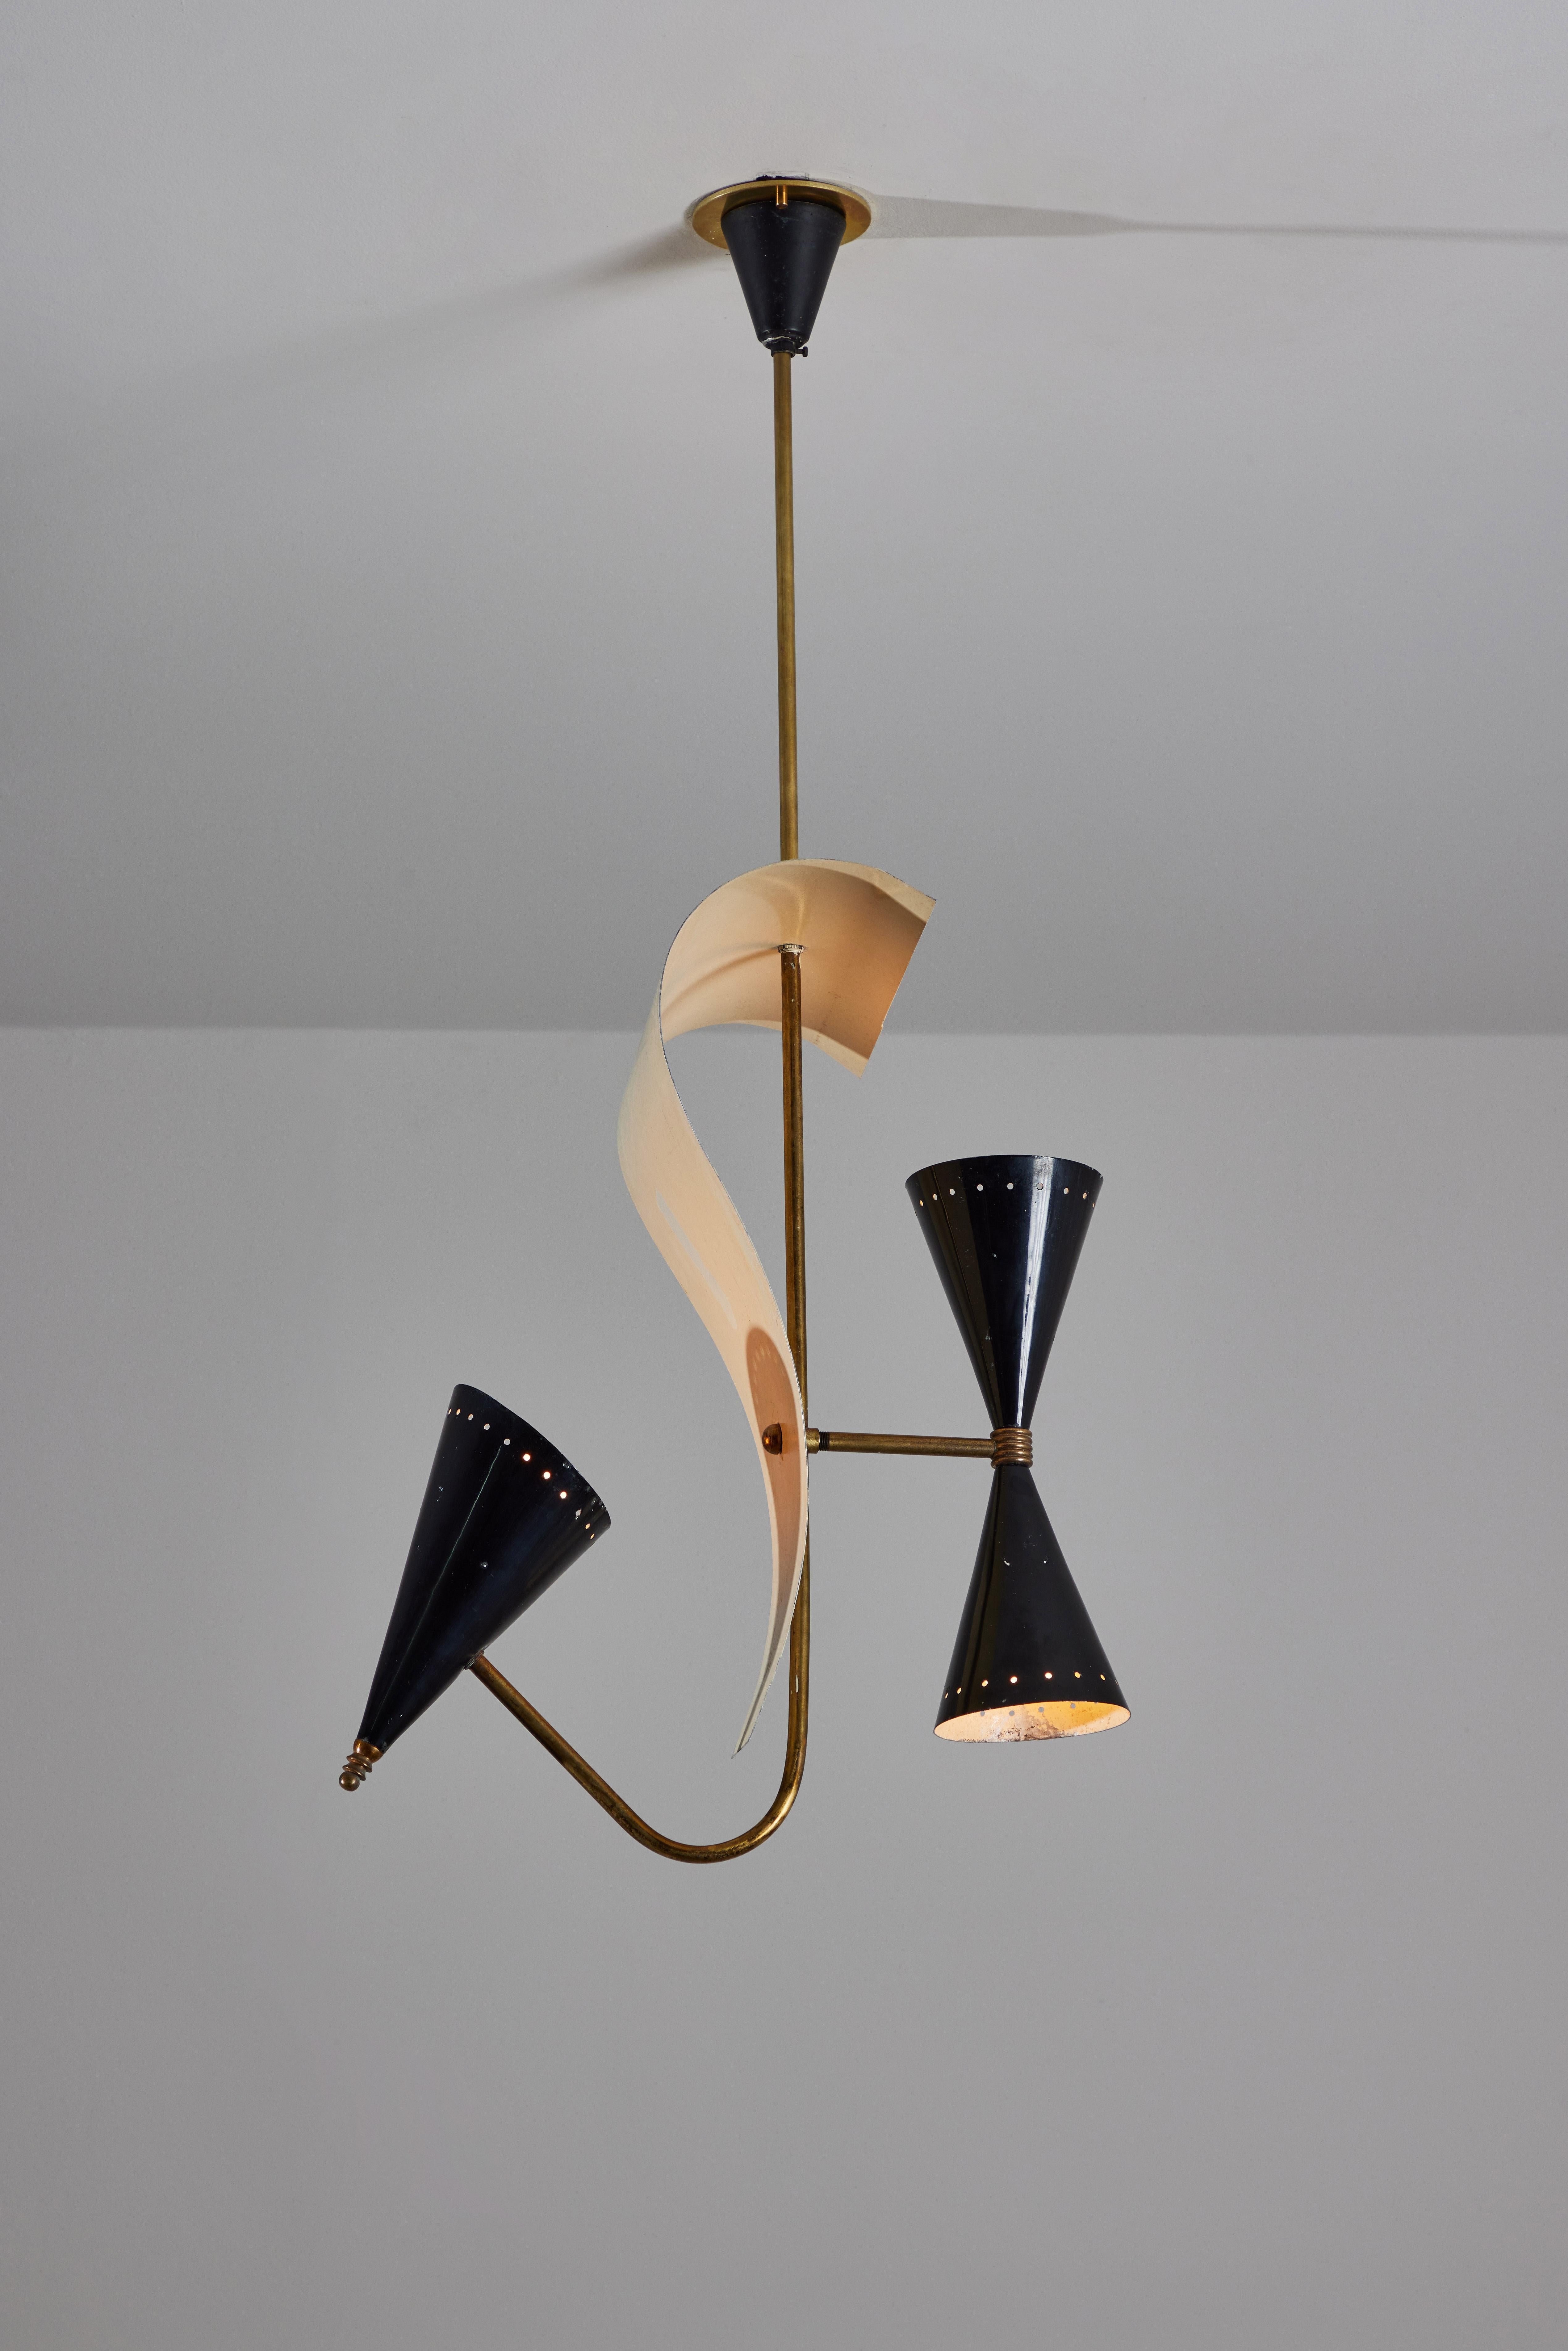 Ceiling light by Gilardi & Barzaghi. Designed and manufactured in Italy, circa 1950s. Enameled metal, brass, custom brass ceiling plate. Rewired for U.S. standards. We recommend three E14 40w maximum bulbs. Bulbs provided as a onetime courtesy.